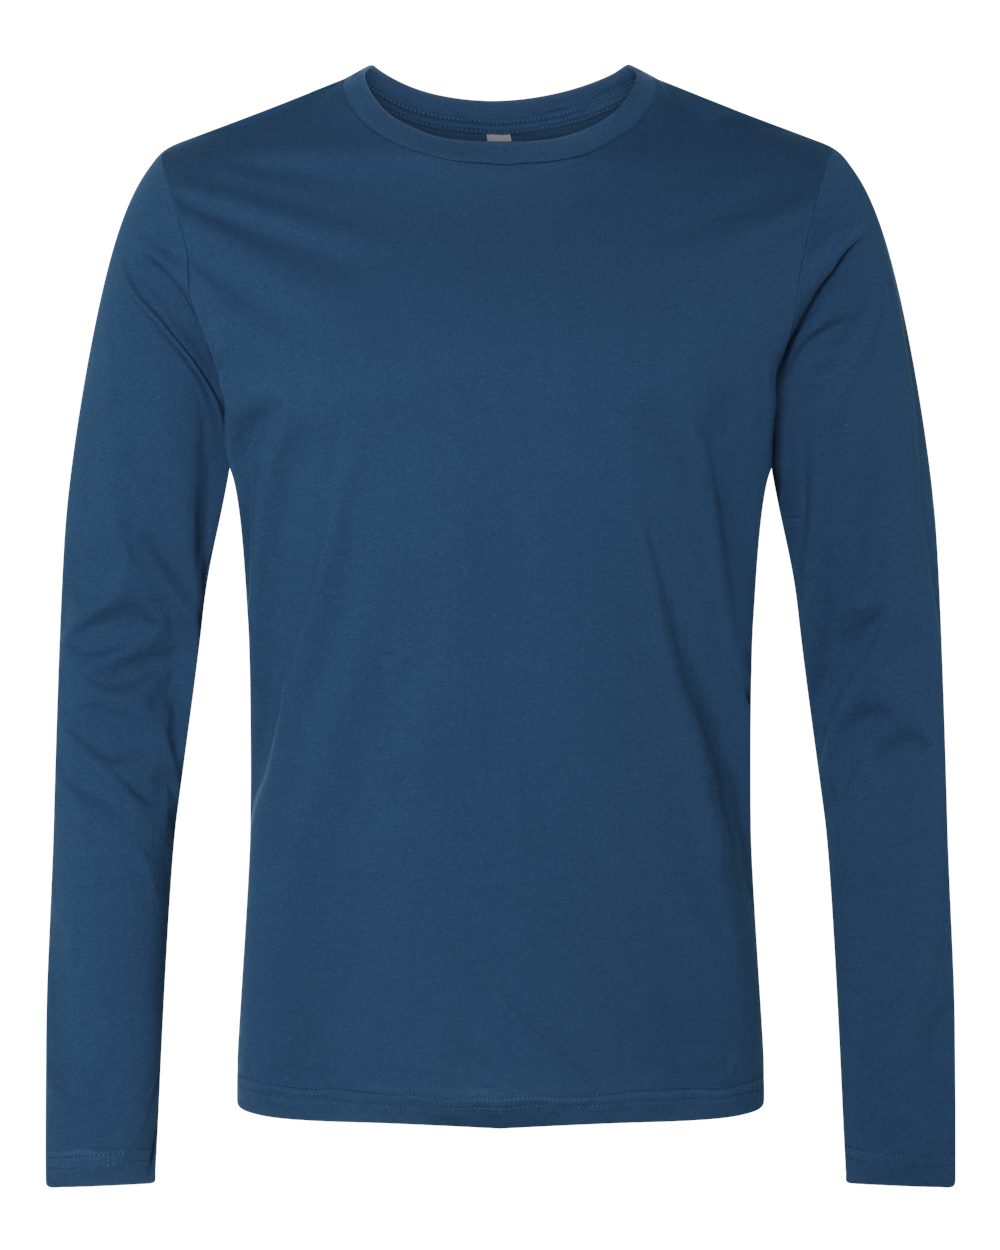 Next Level Long Sleeve (3601) in Cool Blue